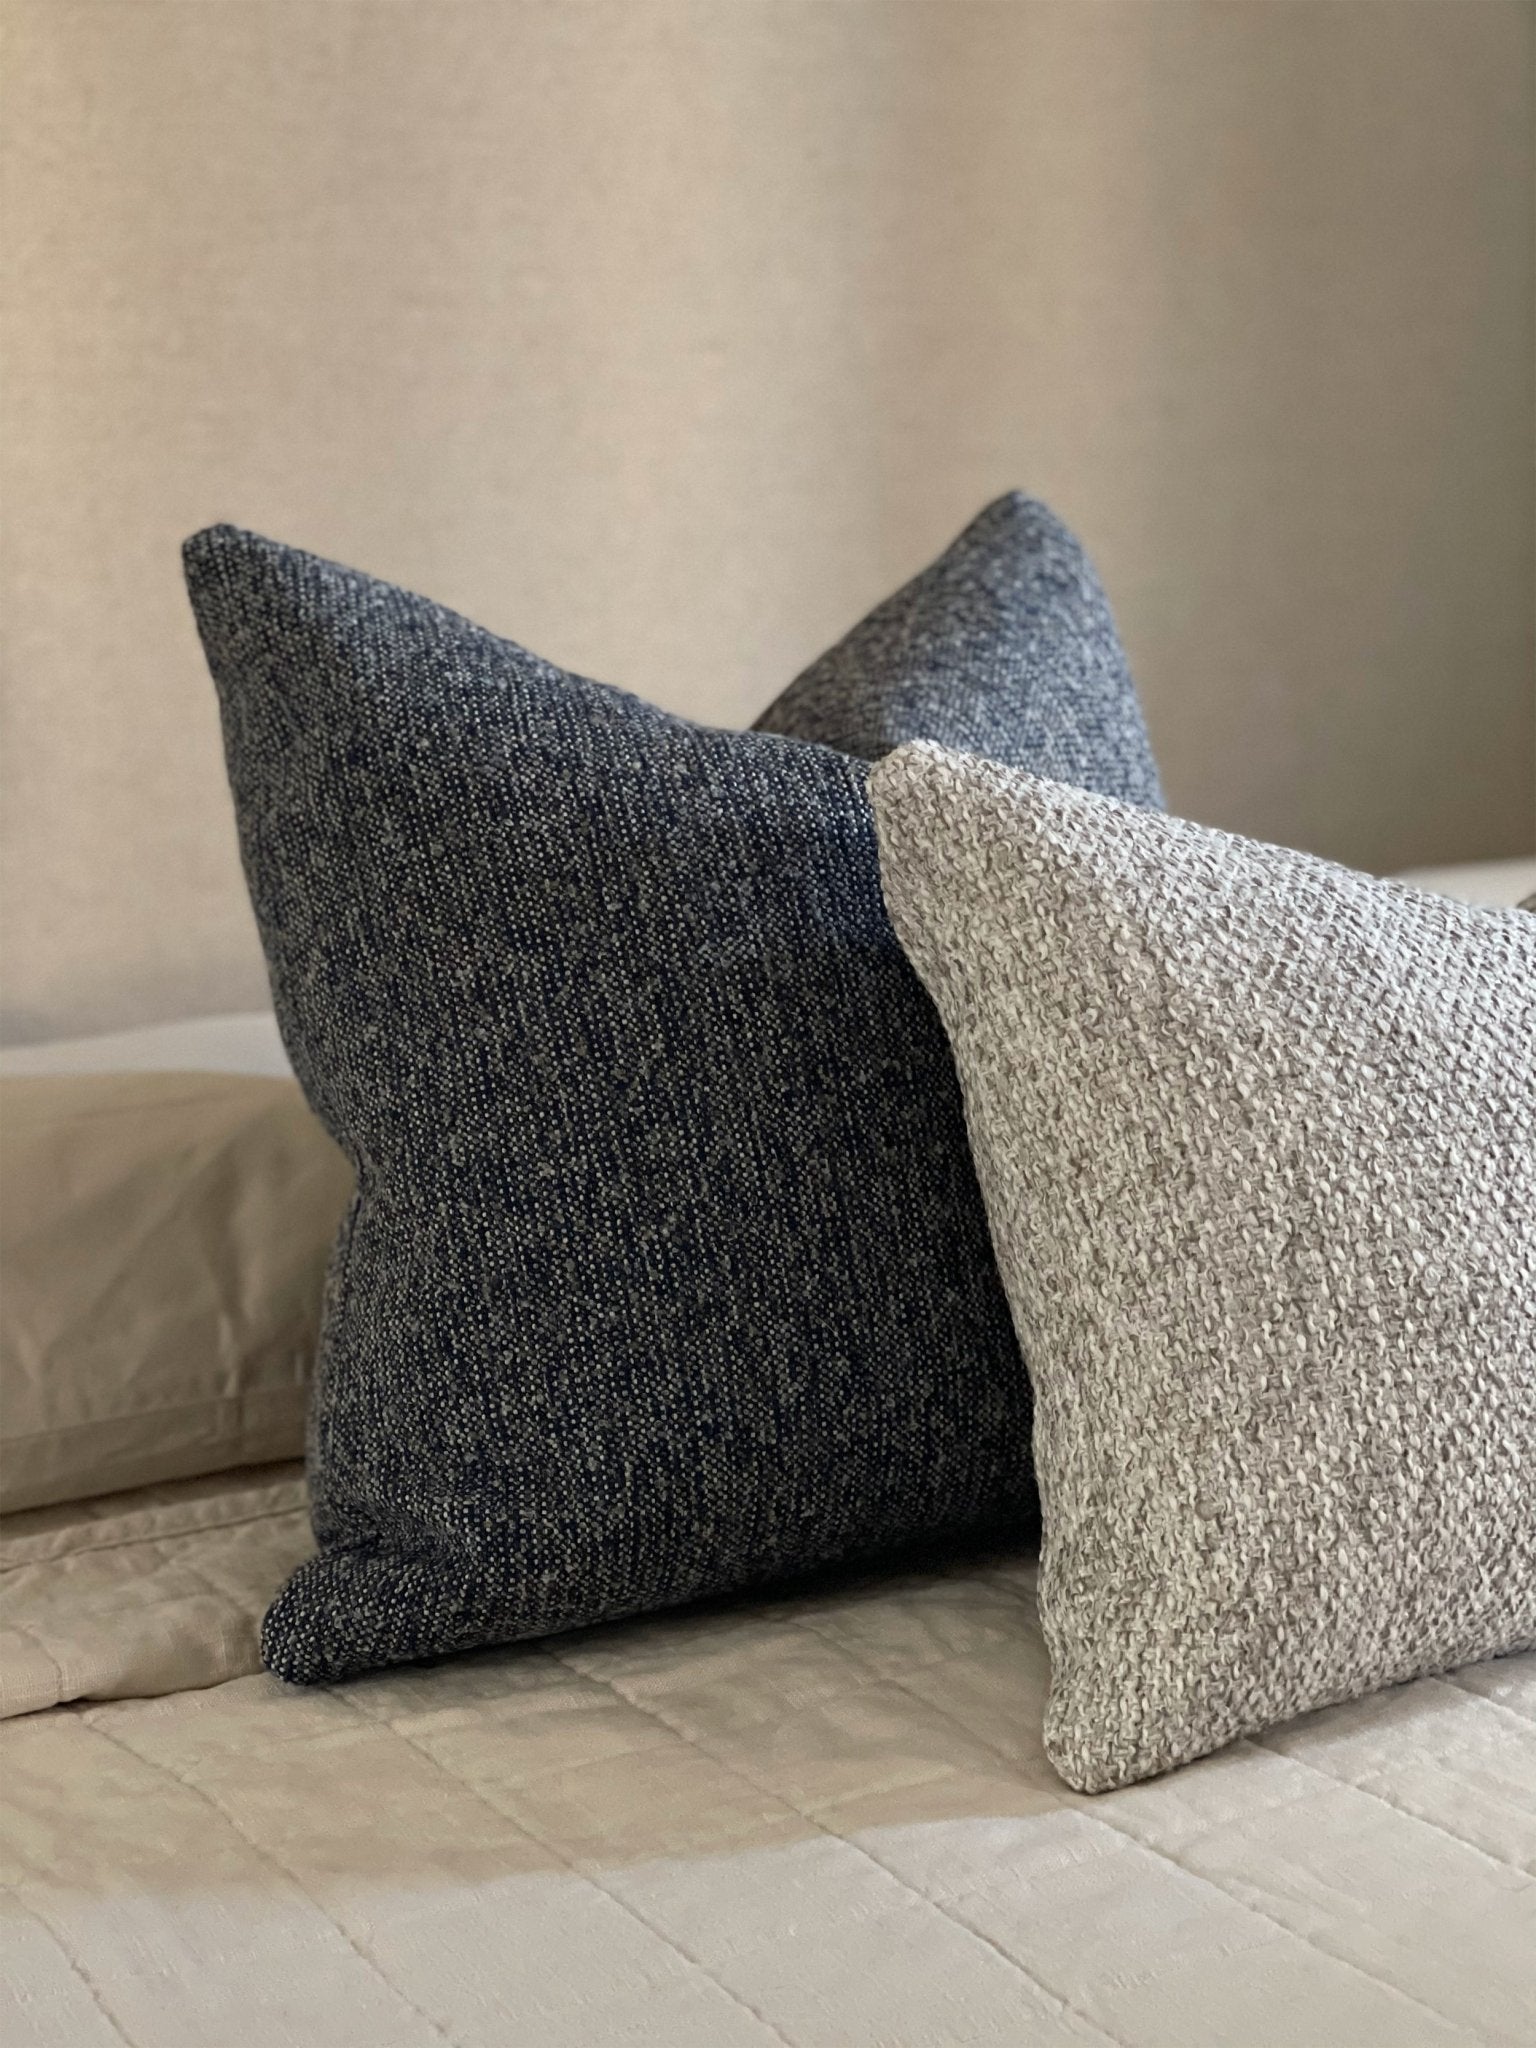 Boucle pillow set in dark blue and taupe featured on cream bedding in minimalist style.